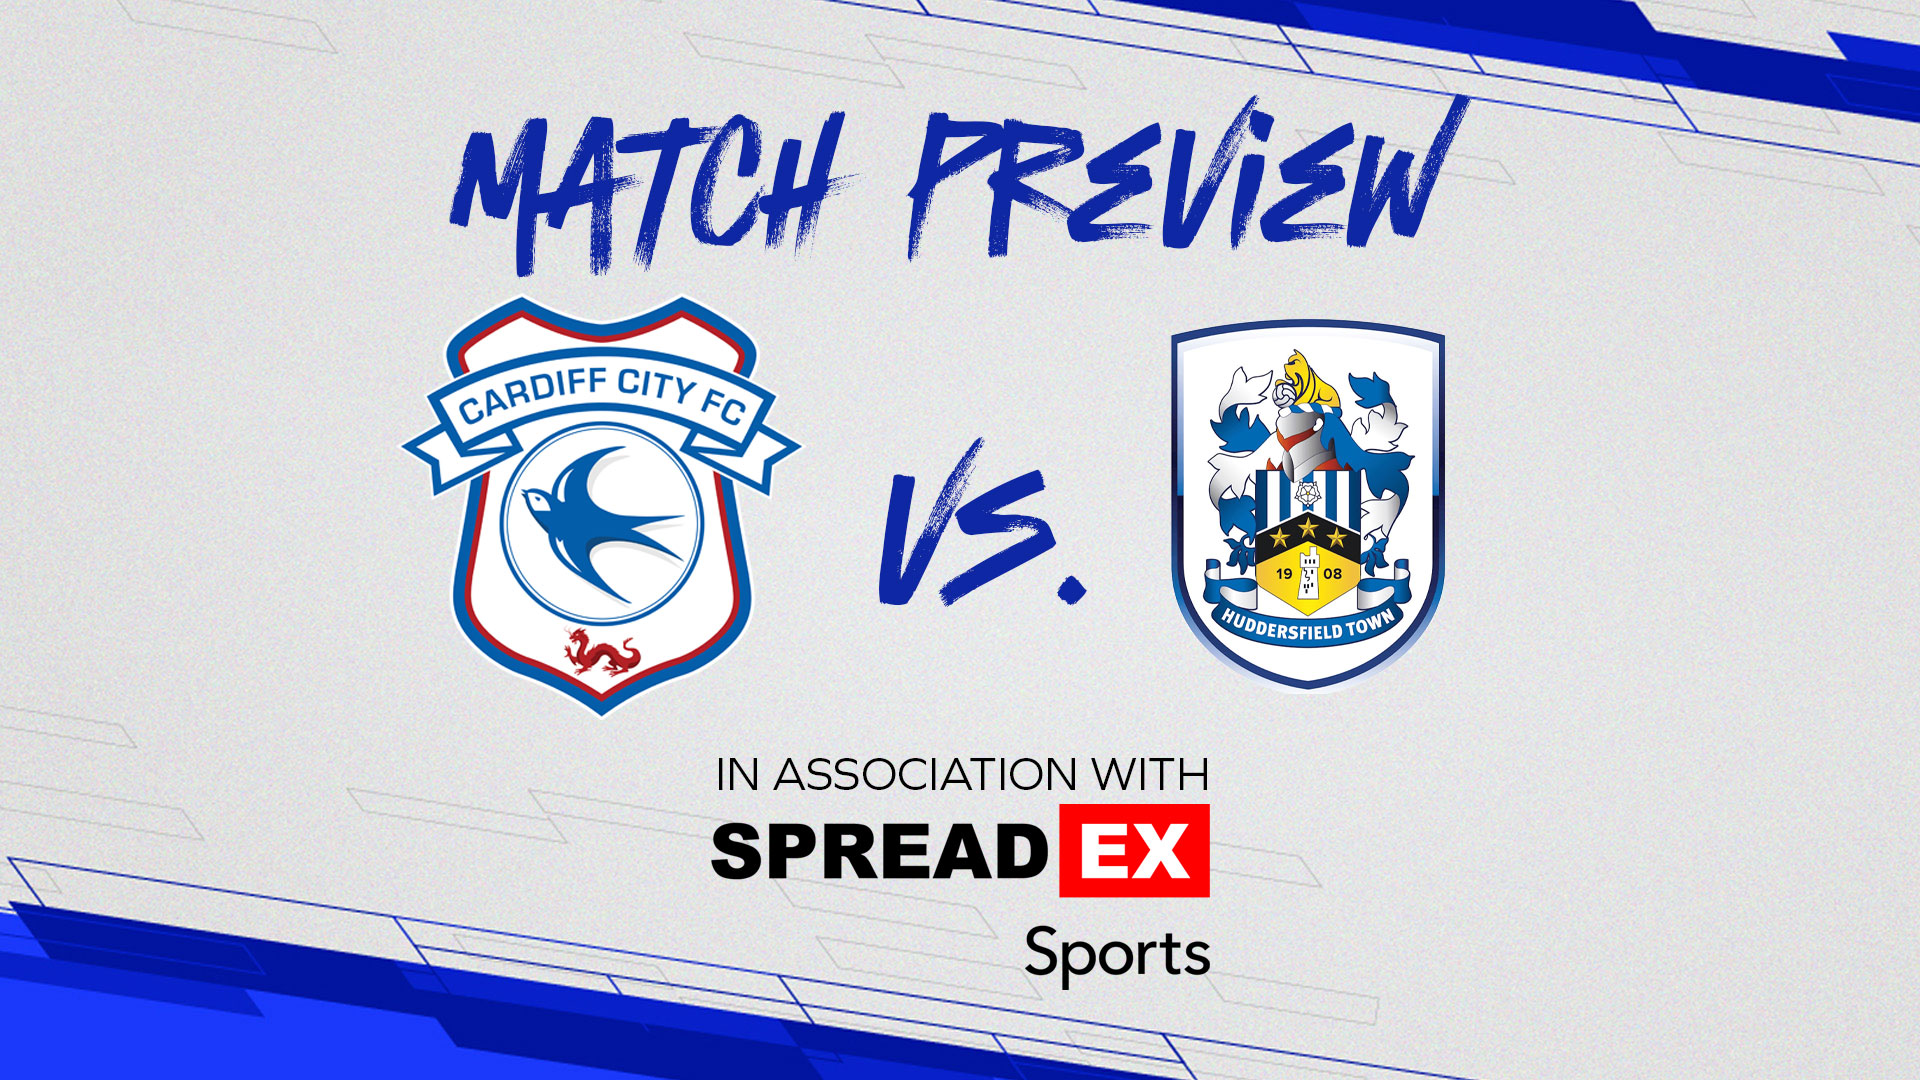 Match Preview: Cardiff City vs. Huddersfield Town